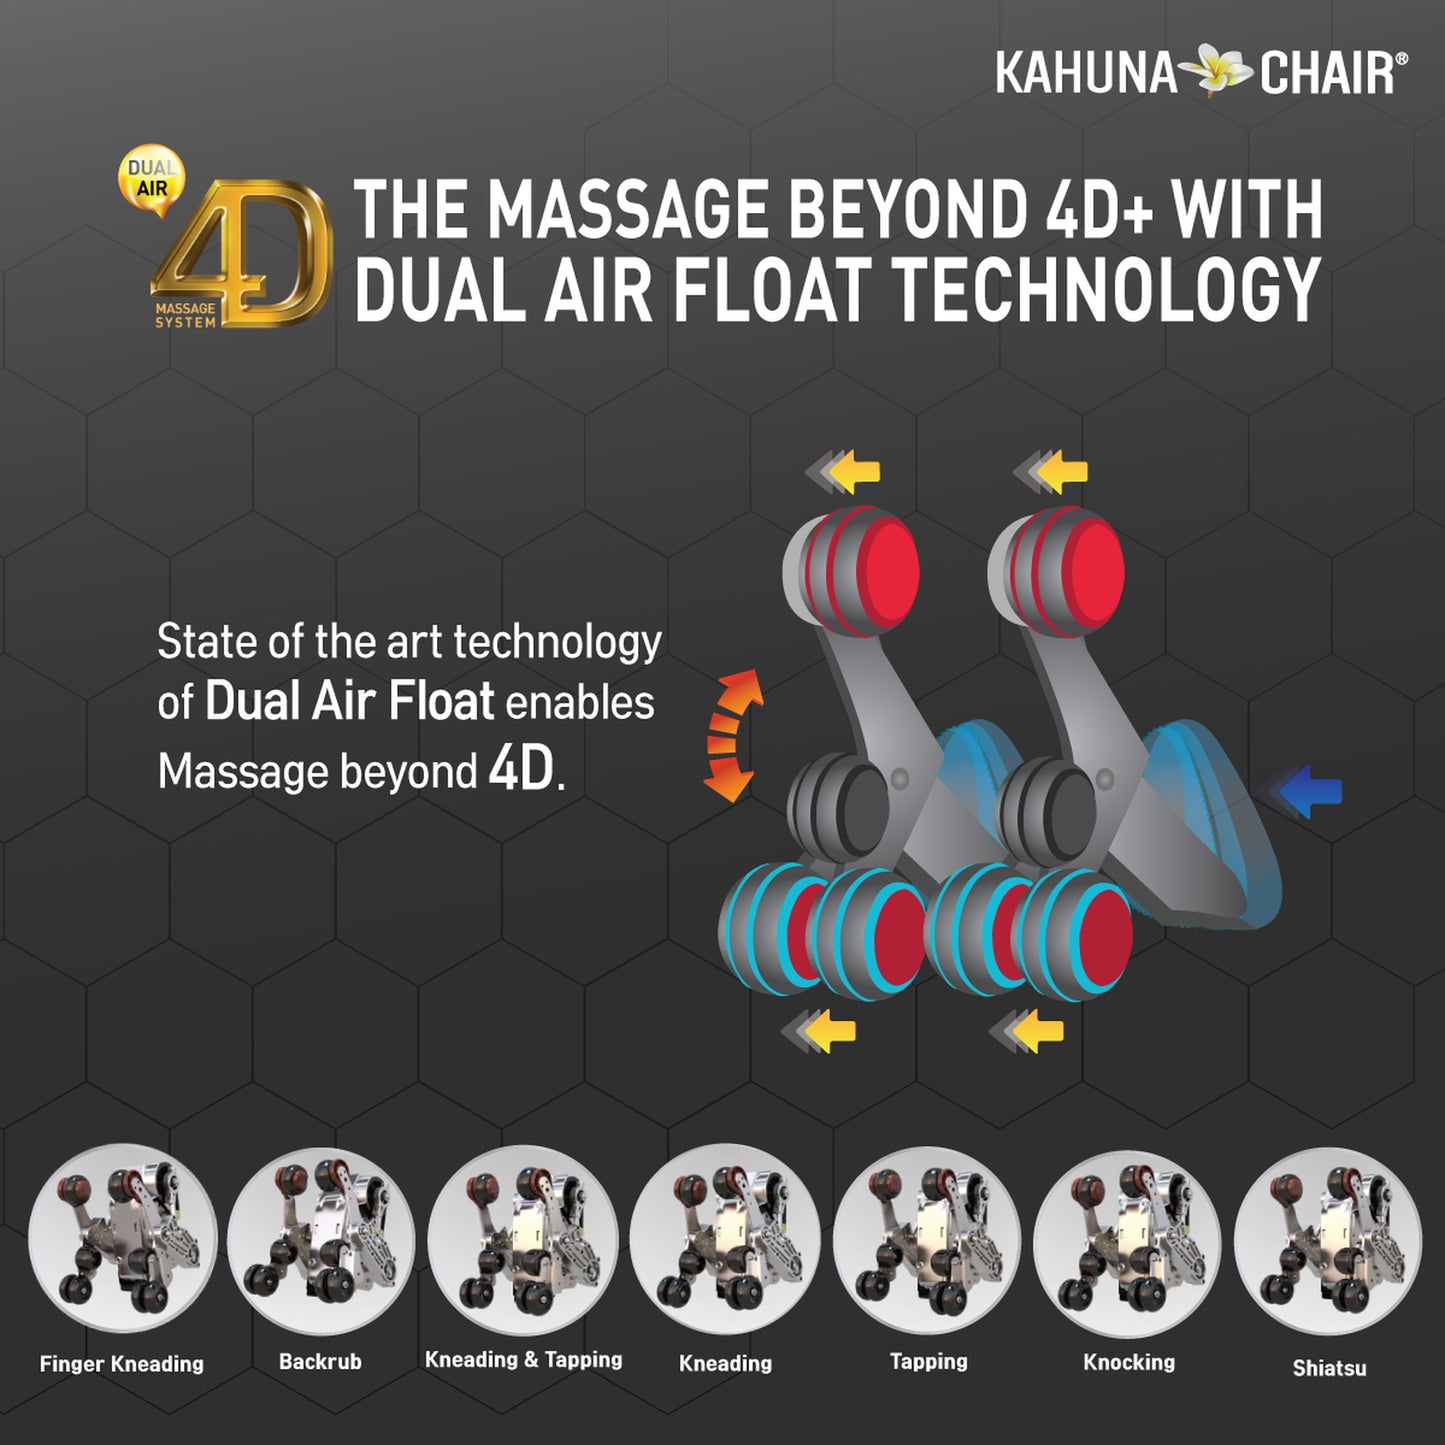 Kahuna 4D+@ Dual Air Float Flex HSL-track with Infrared heating SM-9300 Black